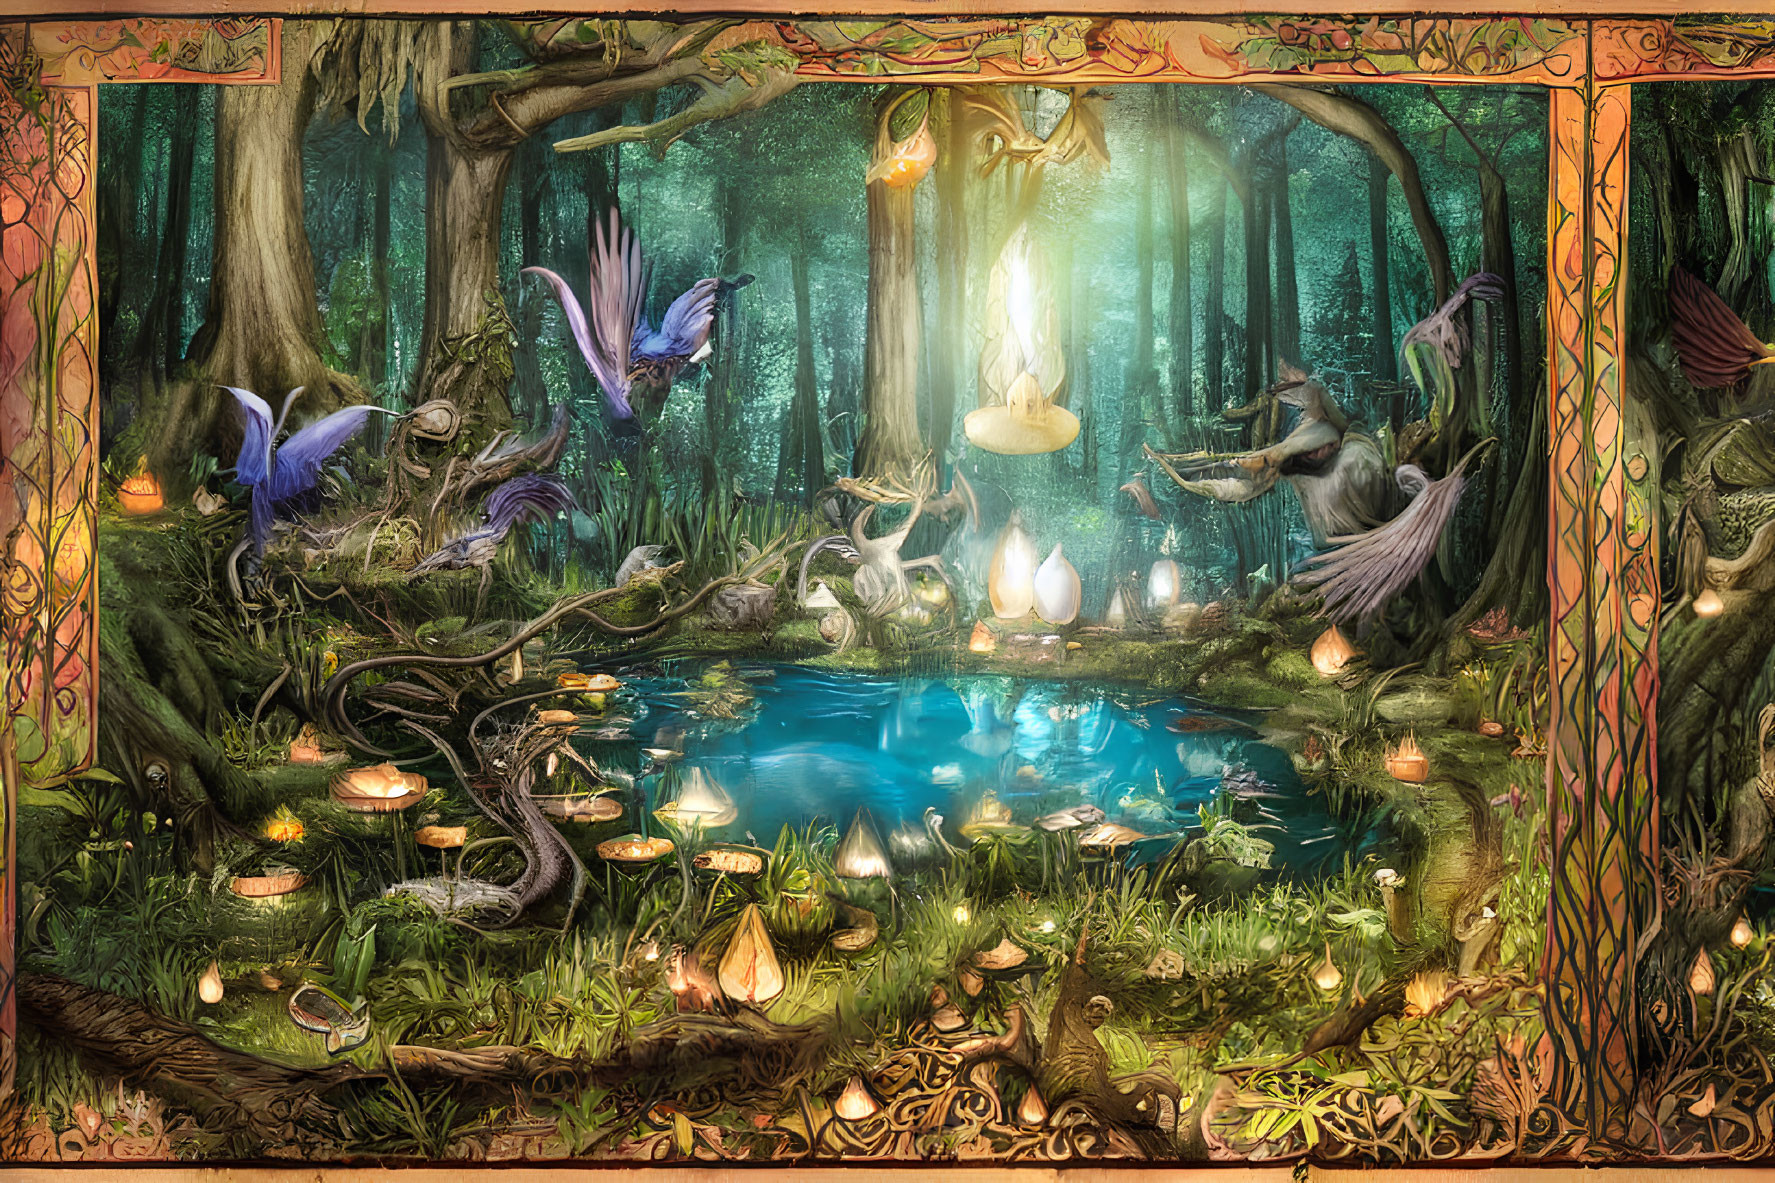 Enchanted forest scene with mythical creatures and glowing pond